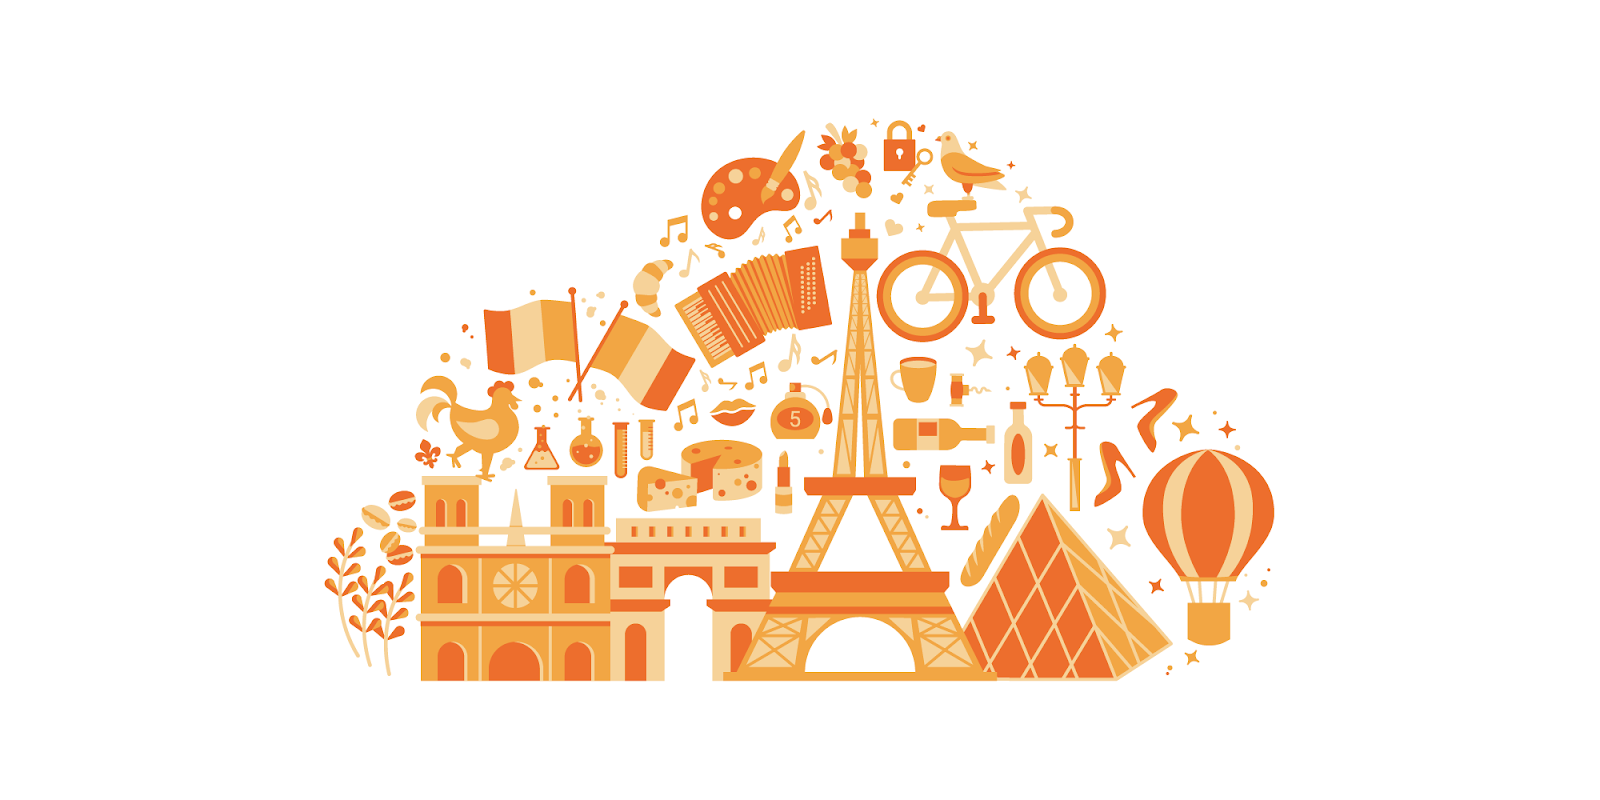 Bienvenue Cloudflare France!
Why I’m helping Cloudflare grow in France